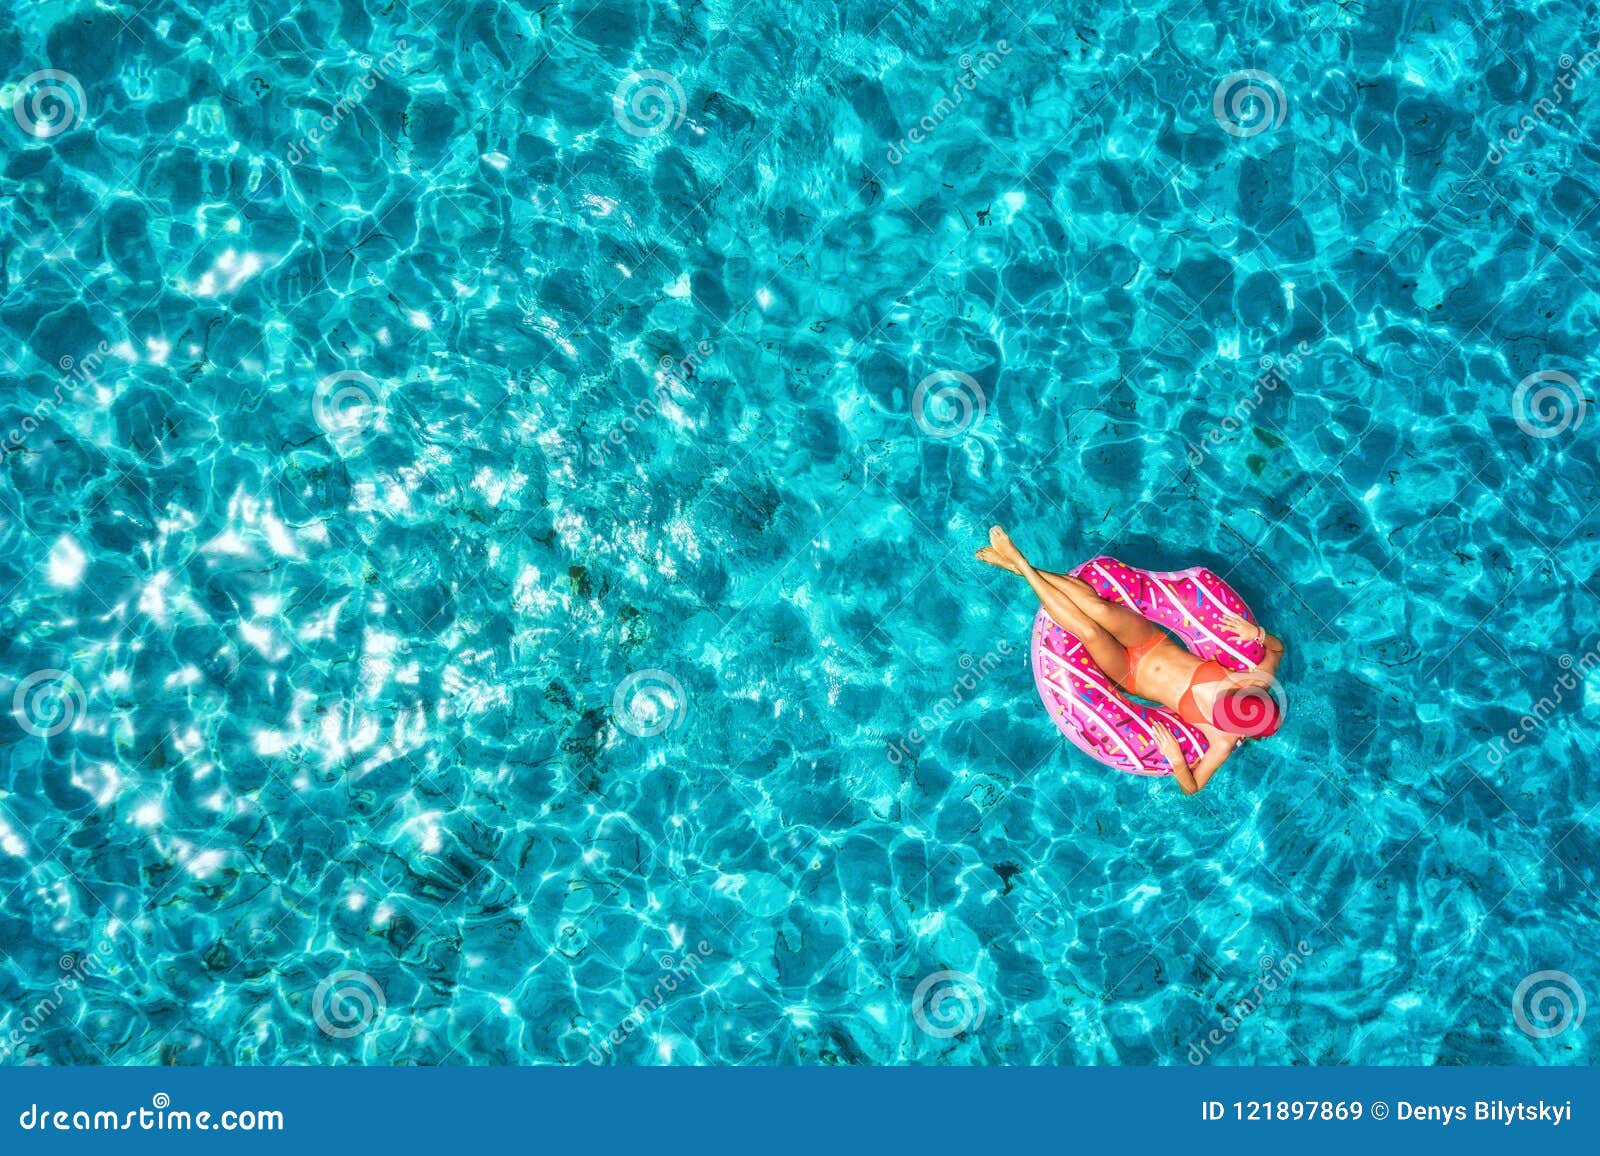 Aerial View of Woman on the Swim Ring in the Sea Stock Image - Image of ...